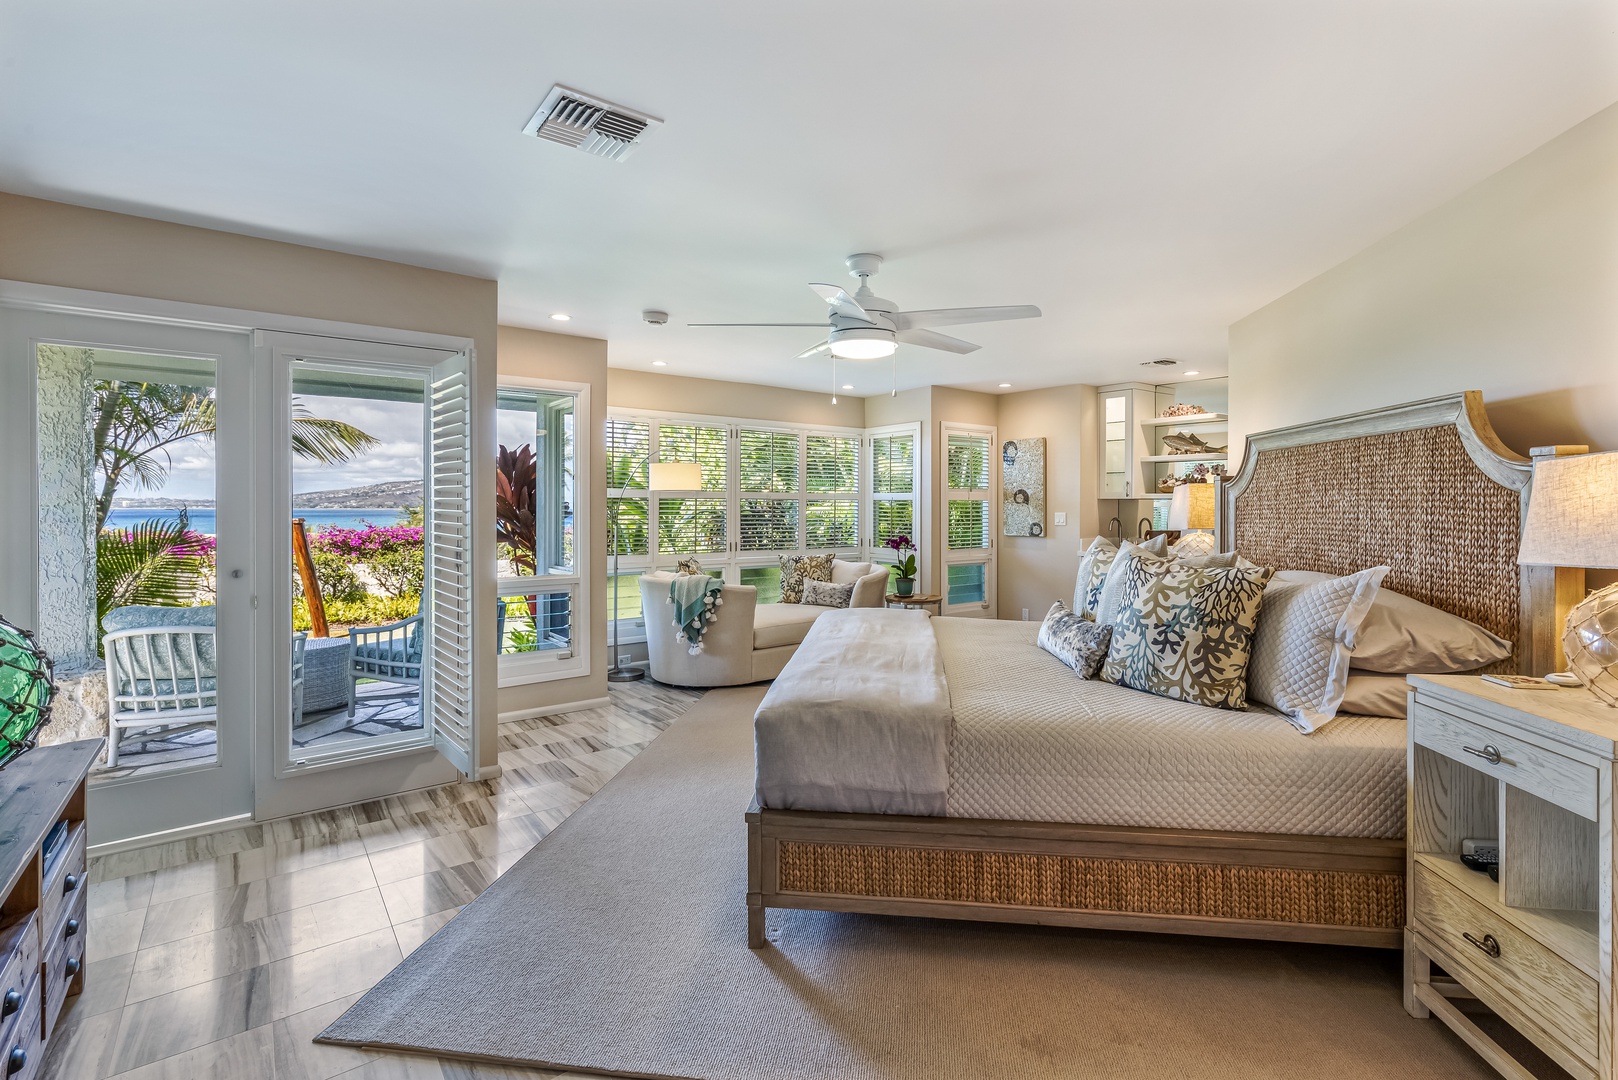 Honolulu Vacation Rentals, Hale Ola - Luxurious Primary with a king-sized bed accompanied by a cozy sitting area, a convenient wet bar complete with a mini-fridge and coffee maker